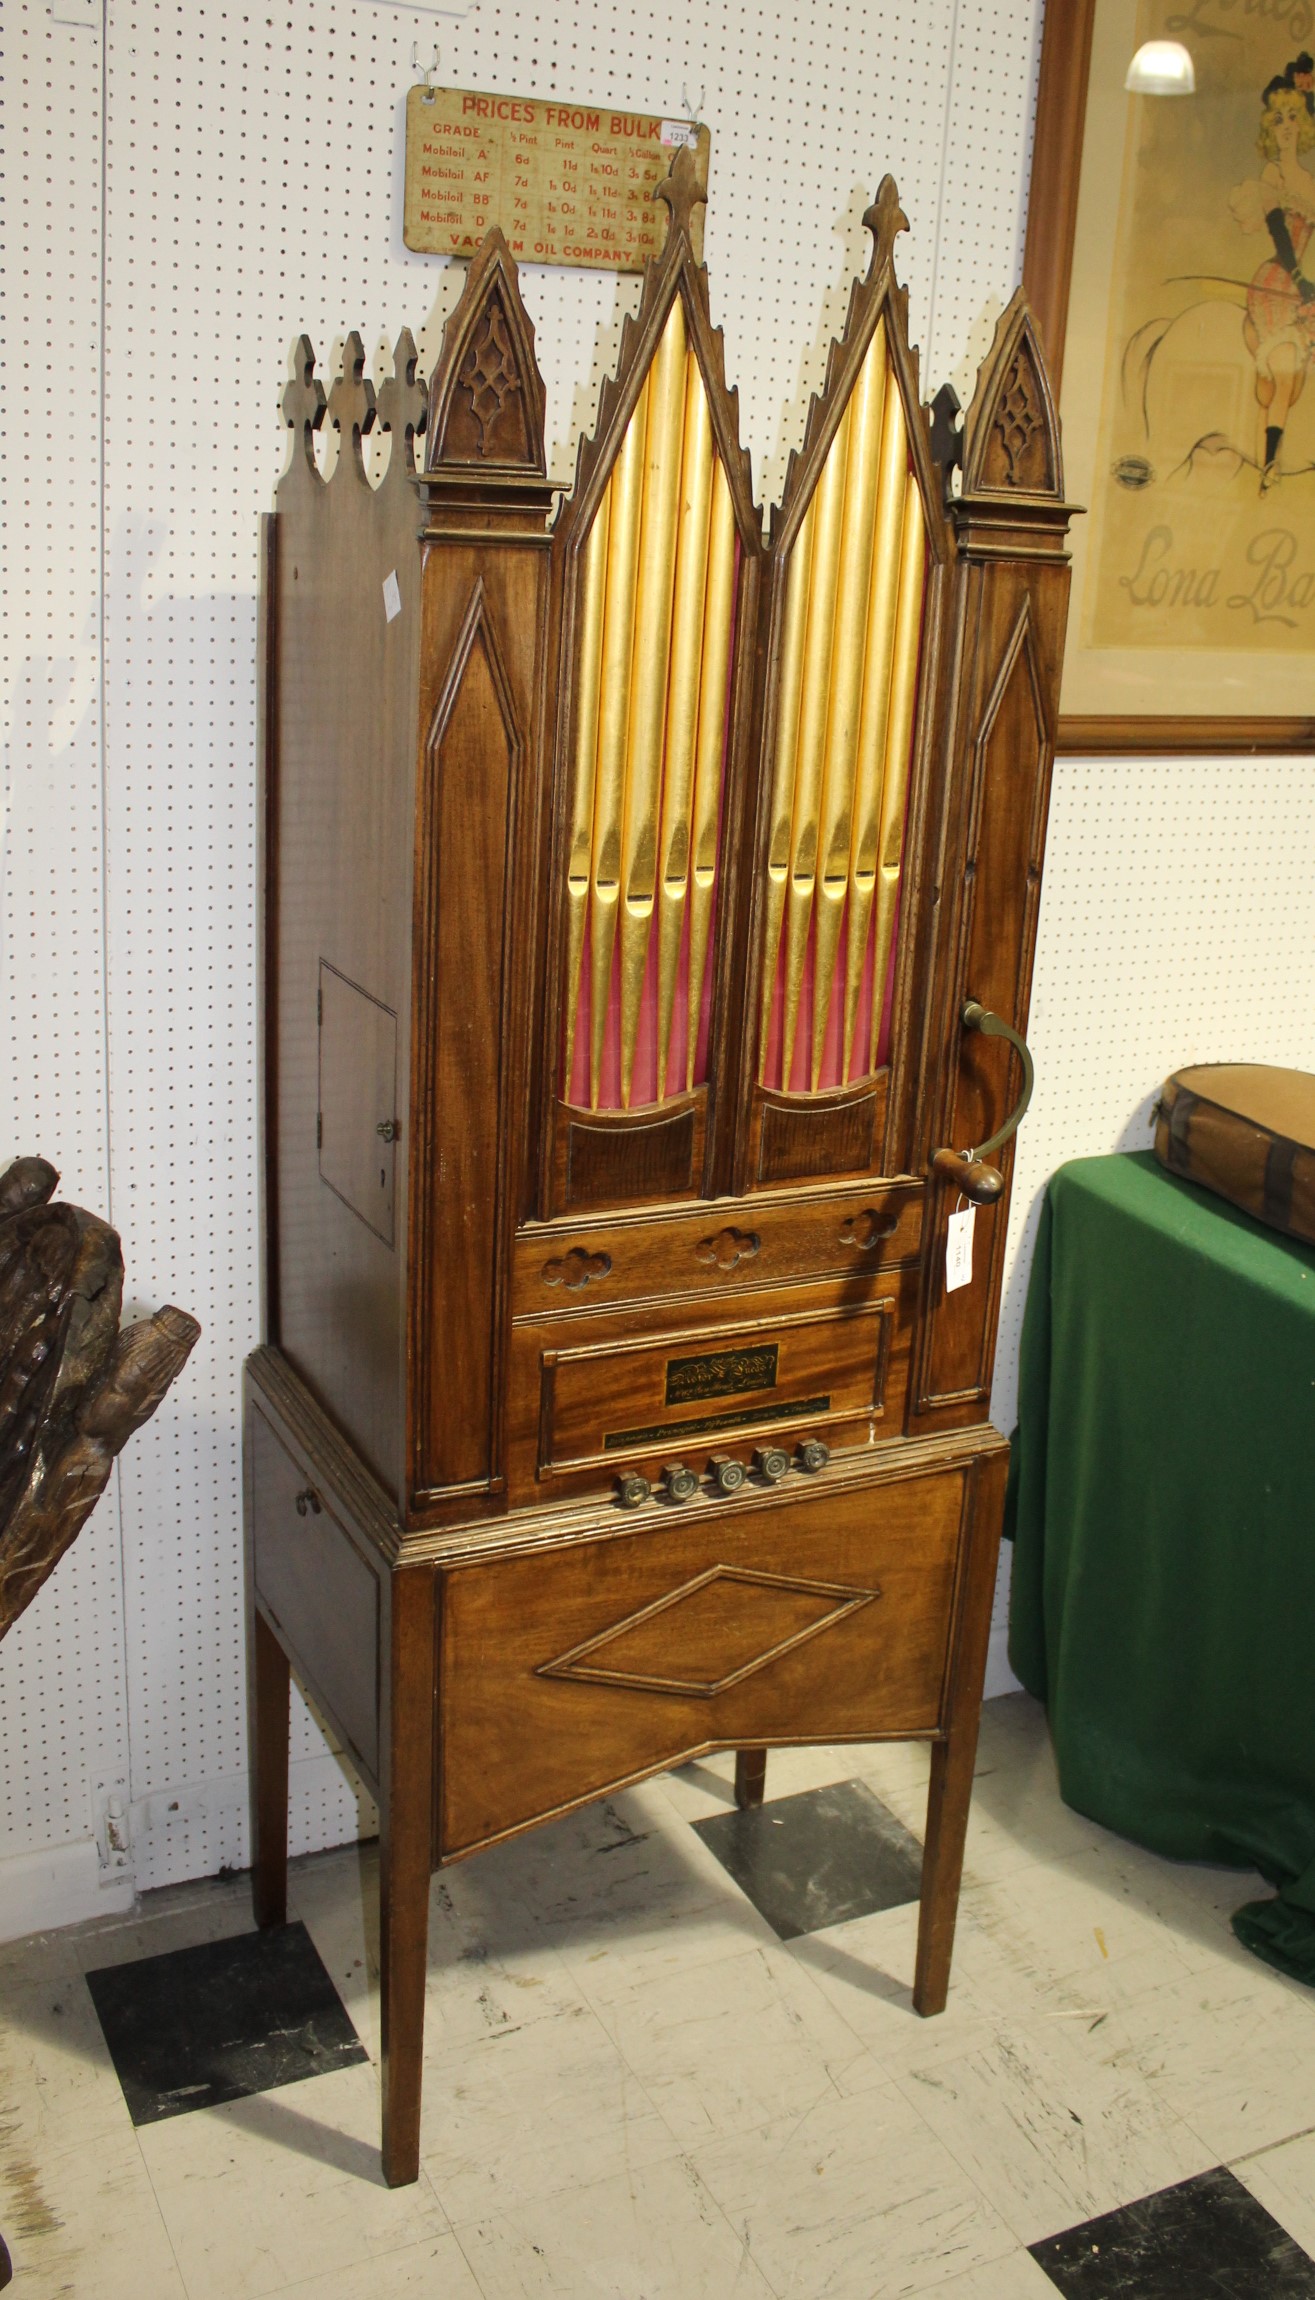 ASTOR & LUCAS 19THC ENGLISH BARREL ORGAN an early 19thc Gothic style barrel organ with decorative - Image 2 of 15